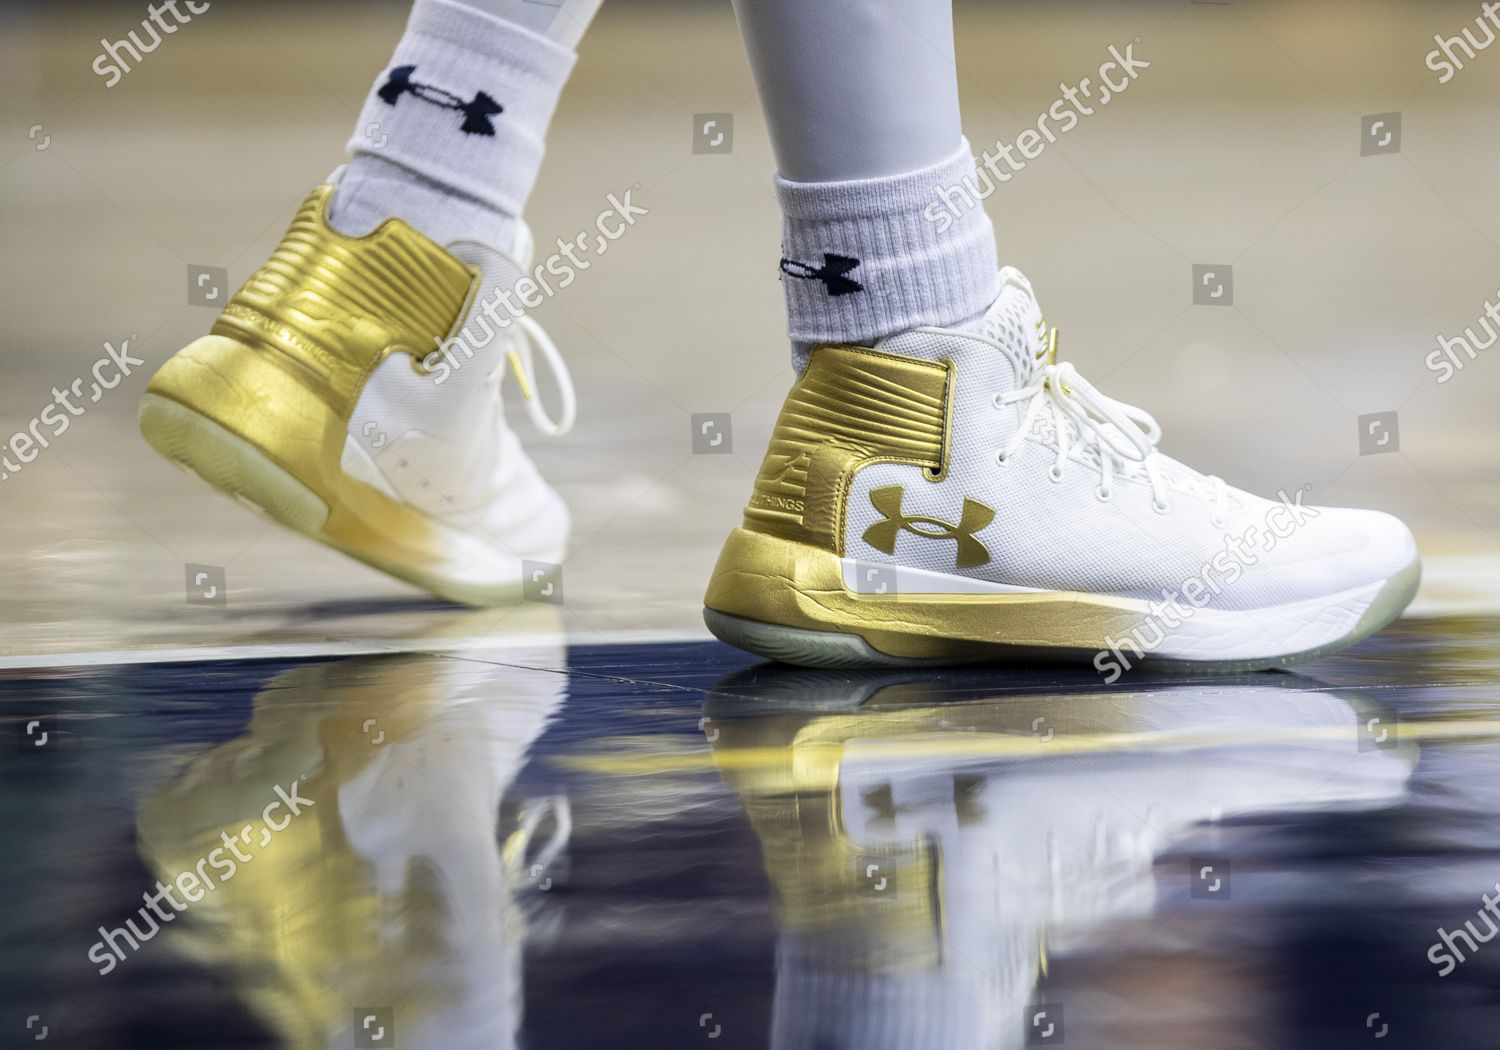 notre dame basketball shoes